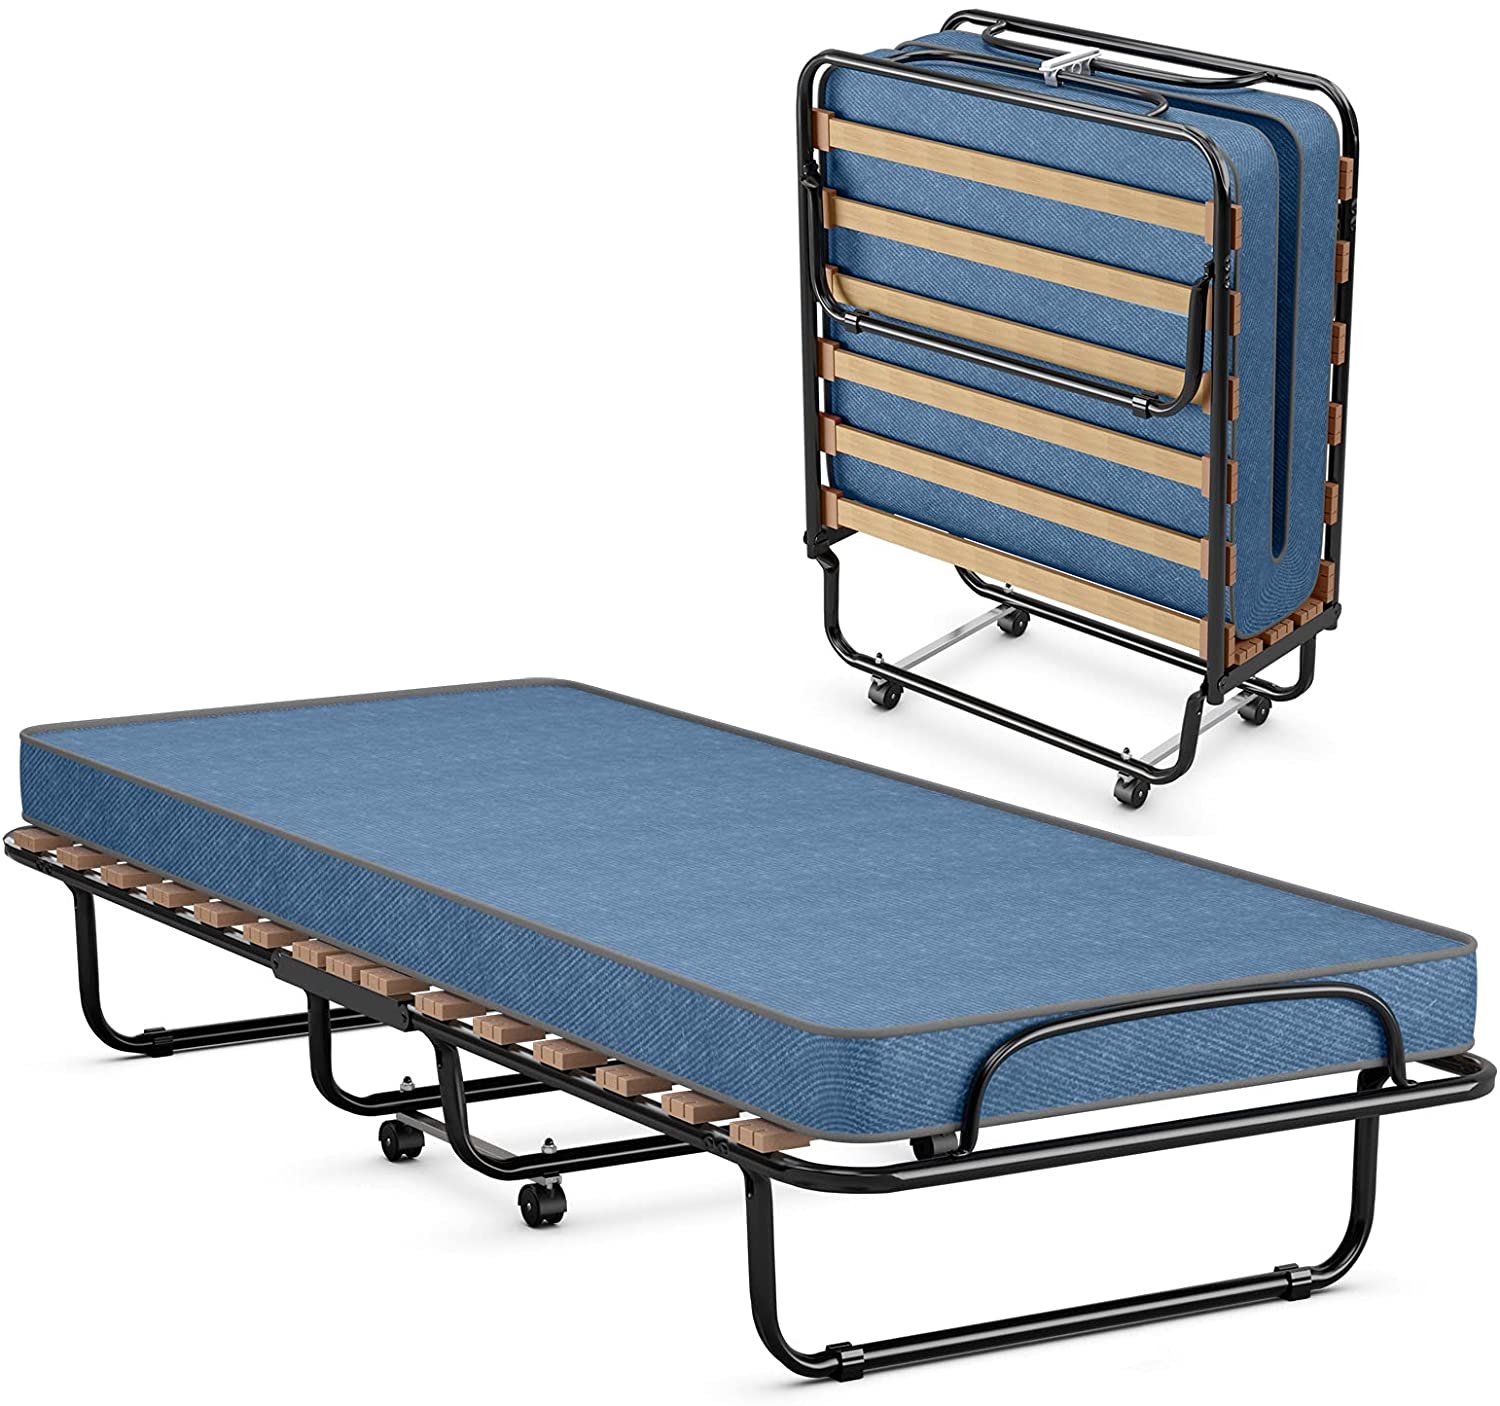 Camping bed